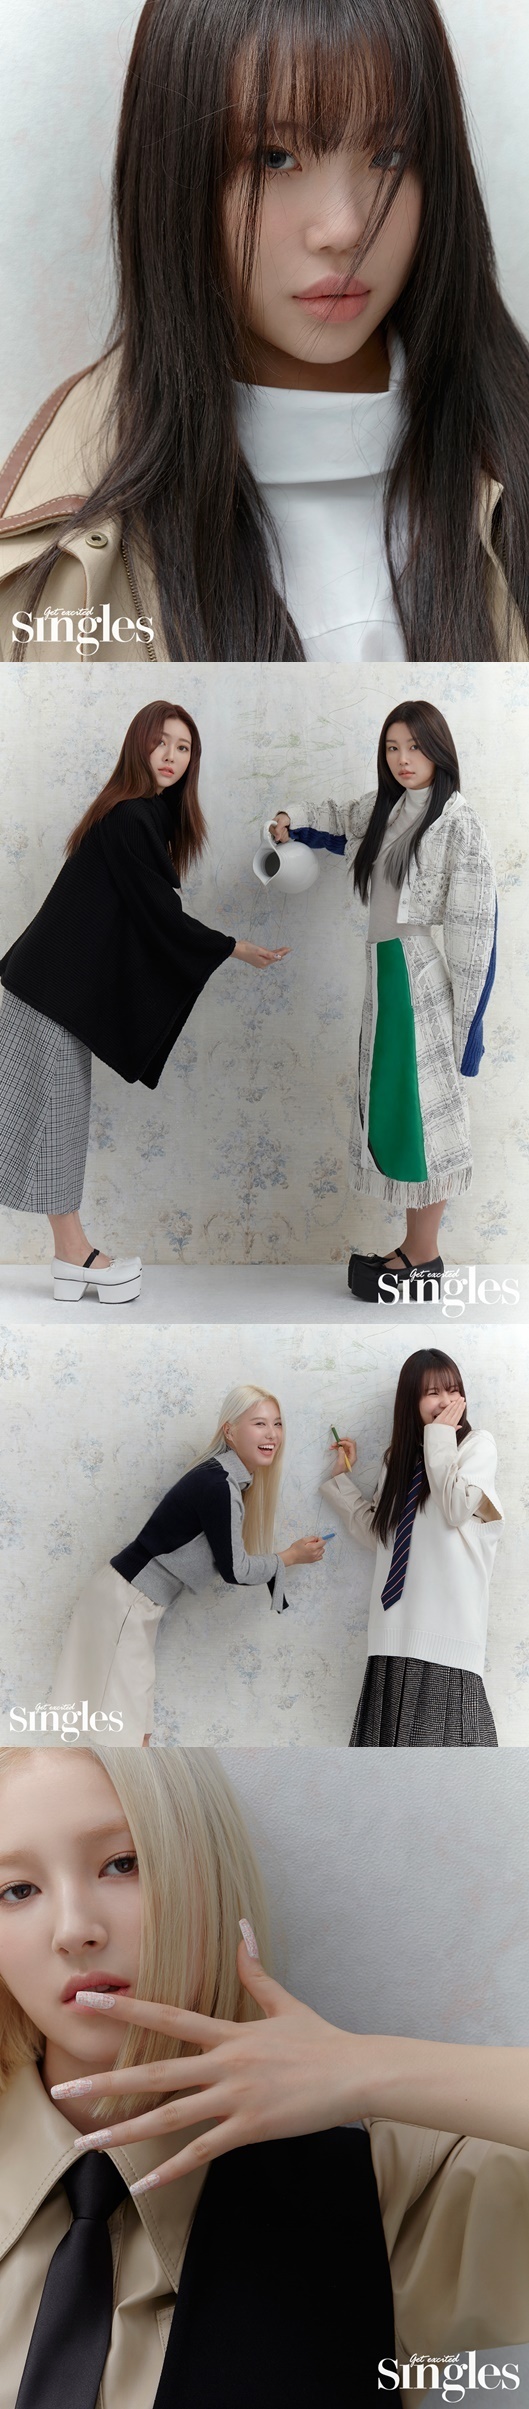 The Momoland picture released by Fashion Magazine Singles on the 26th has a calm and elegant sensibility.Momoland is a back door that shows a smile of a clear girl and boasts a warm chemistry, but it turns into a serious and fascinating expression and emits a reverse charm that is contrary to the usual excitement on stage.Especially, it showed the concept genius aspect, including both the innocence of the young girl and the beauty of the mature woman.In an interview with Han, Jane said, I feel like I am filling up with a kind of social life that meets many people and stays with members. As a singer, his career has accumulated, he seems to have become more relaxed and more able to catch on stage than before. Hyebin said, Now I learn a little bit and think more than before. Nancy said, I have become able to see the world more widely and think more deeply with members.Momoland is also popular, so I think it is confident now, JooE said. I have to be more confident and shameless. Ain said, My own values ​​and colors have become more solid than my debut.